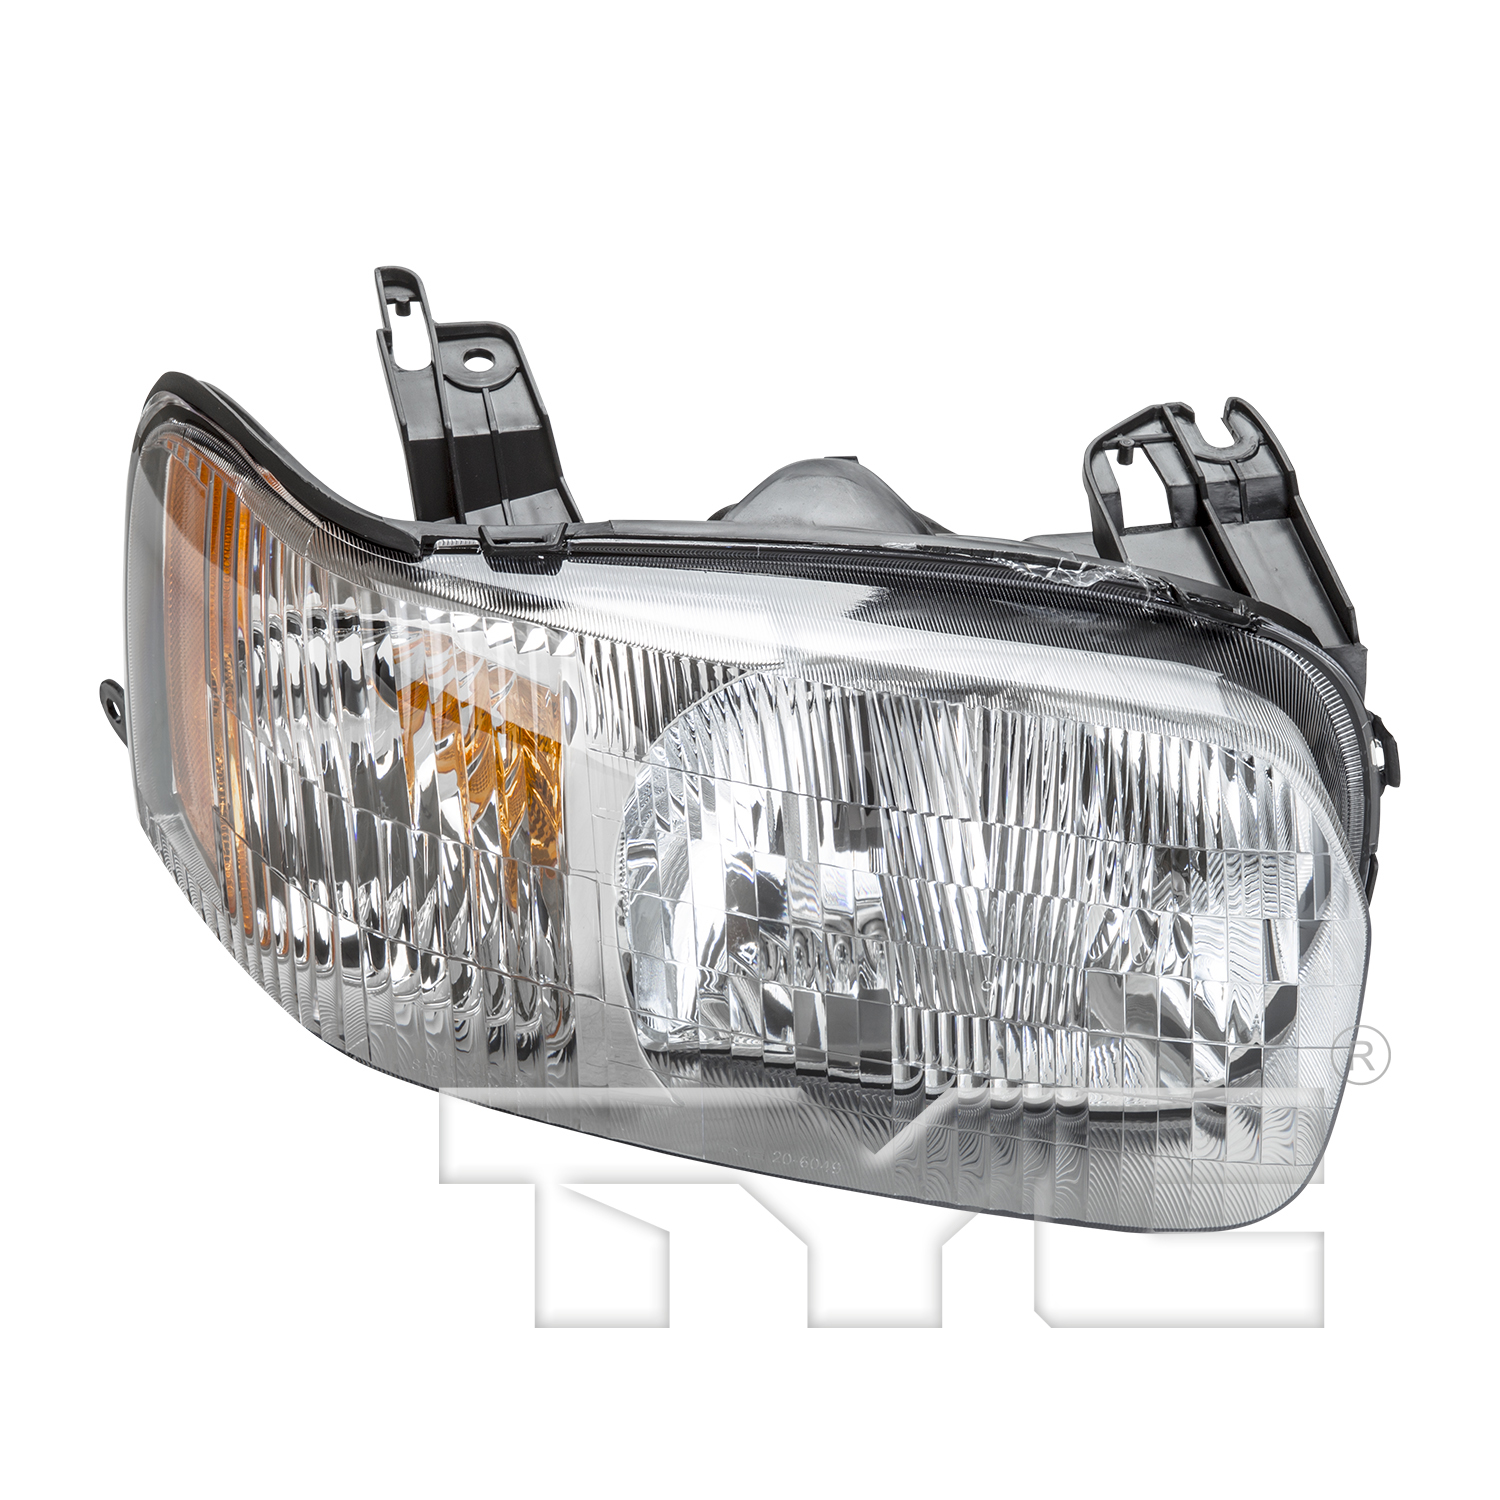 Aftermarket HEADLIGHTS for FORD - ESCAPE, ESCAPE,01-04,RT Headlamp lens/housing